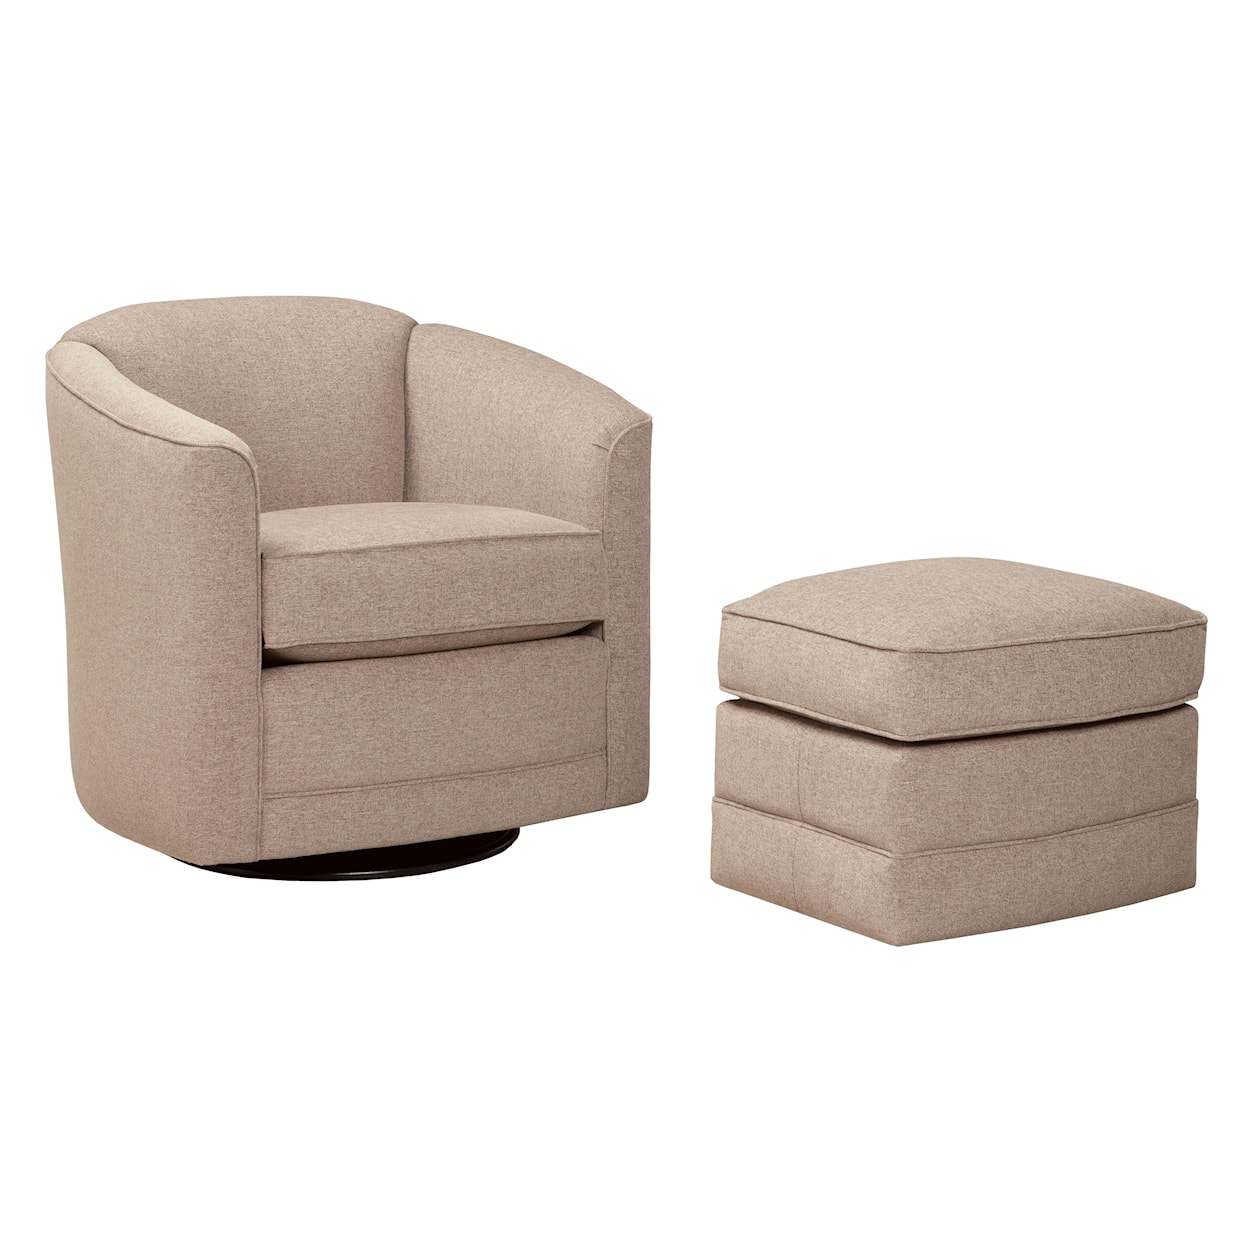 Smith Brothers 506 Swivel Chair and Ottoman Set